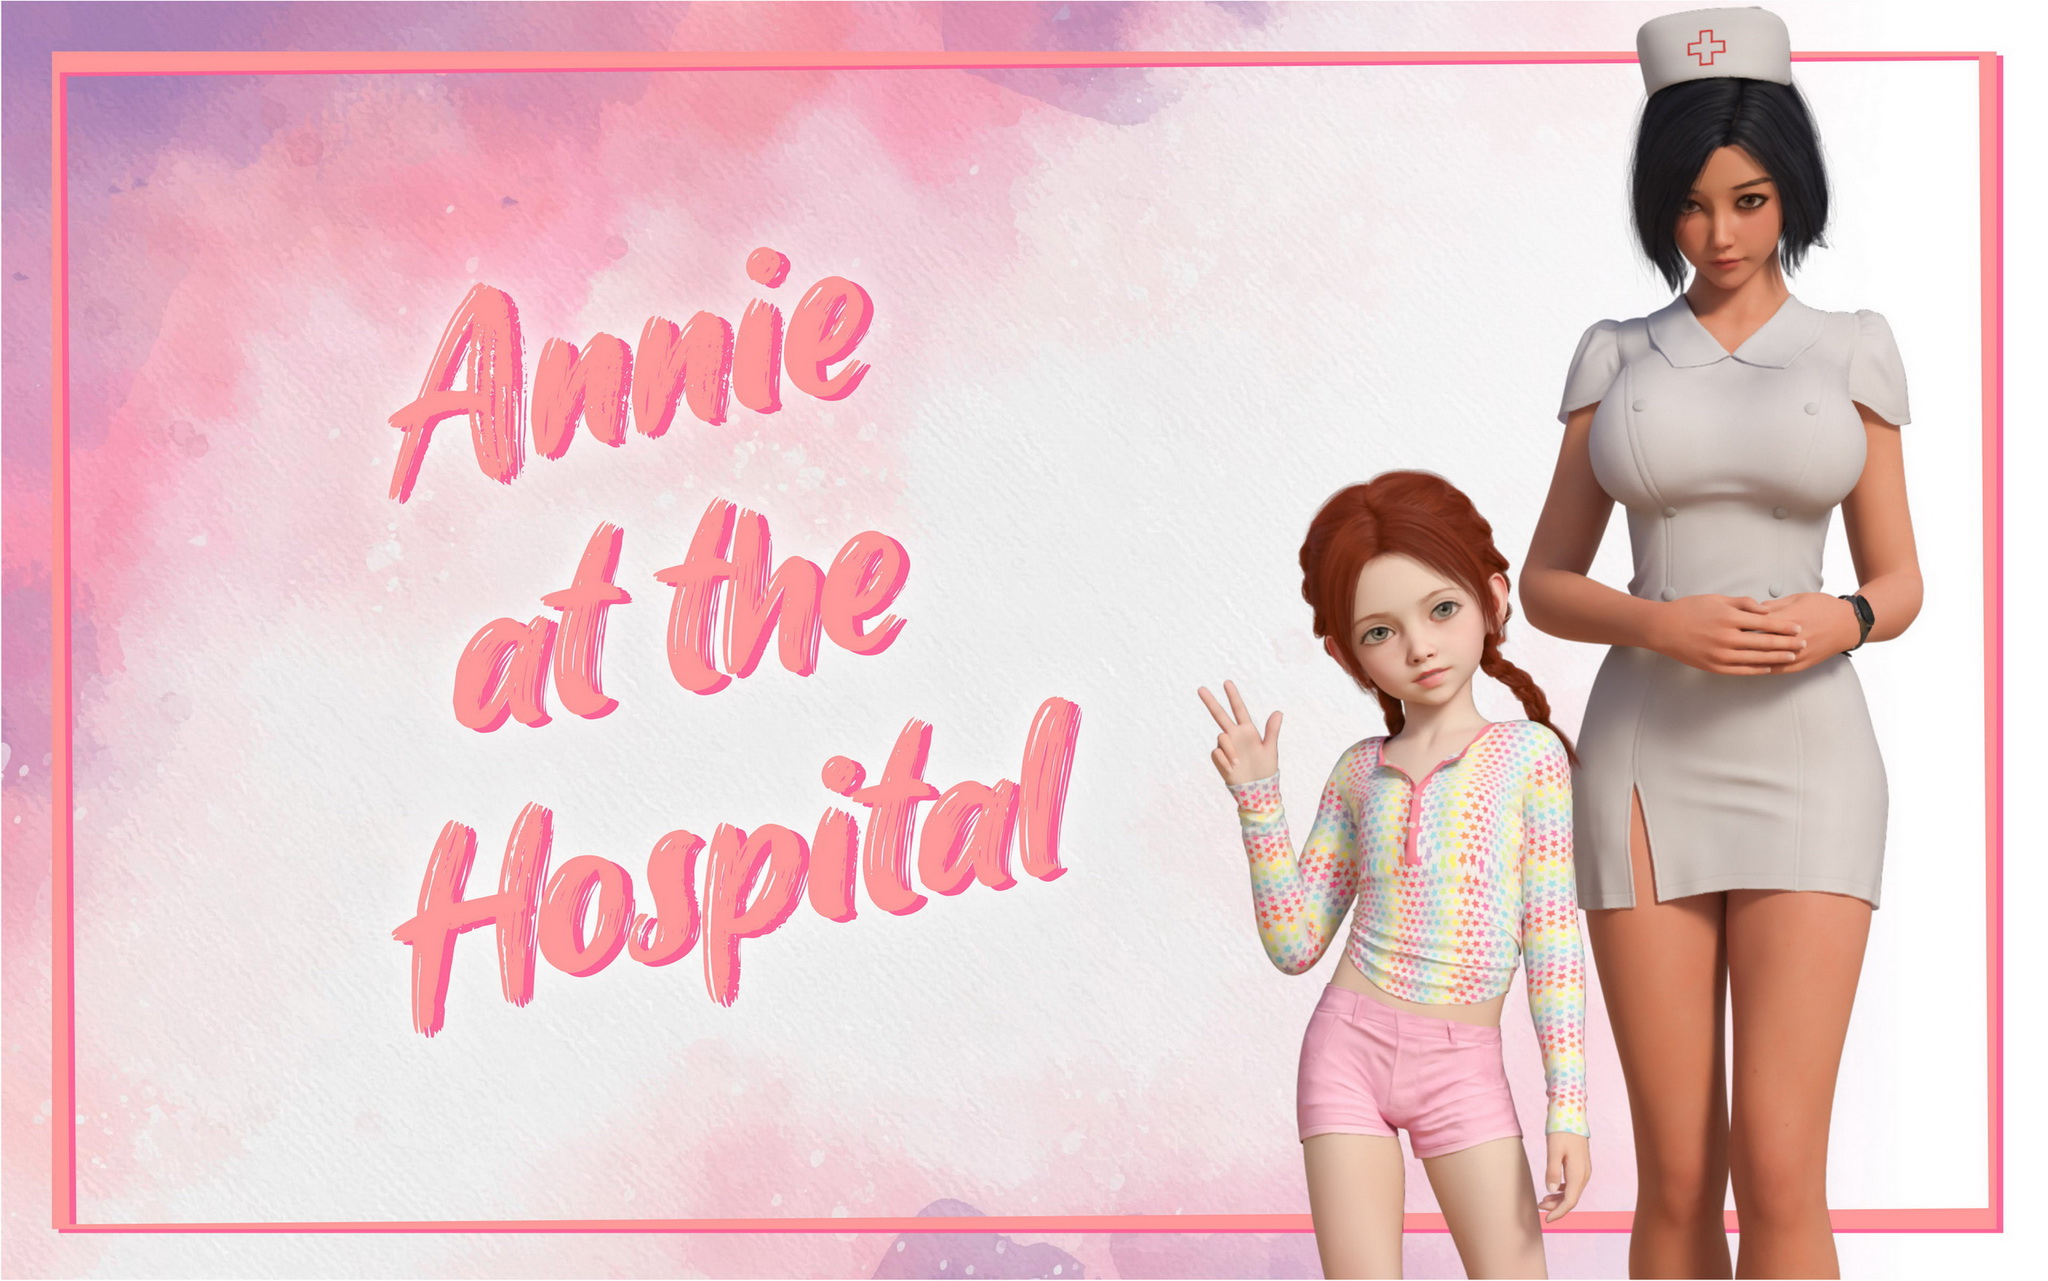 [SevenGromwoid] Annie at the Hospital